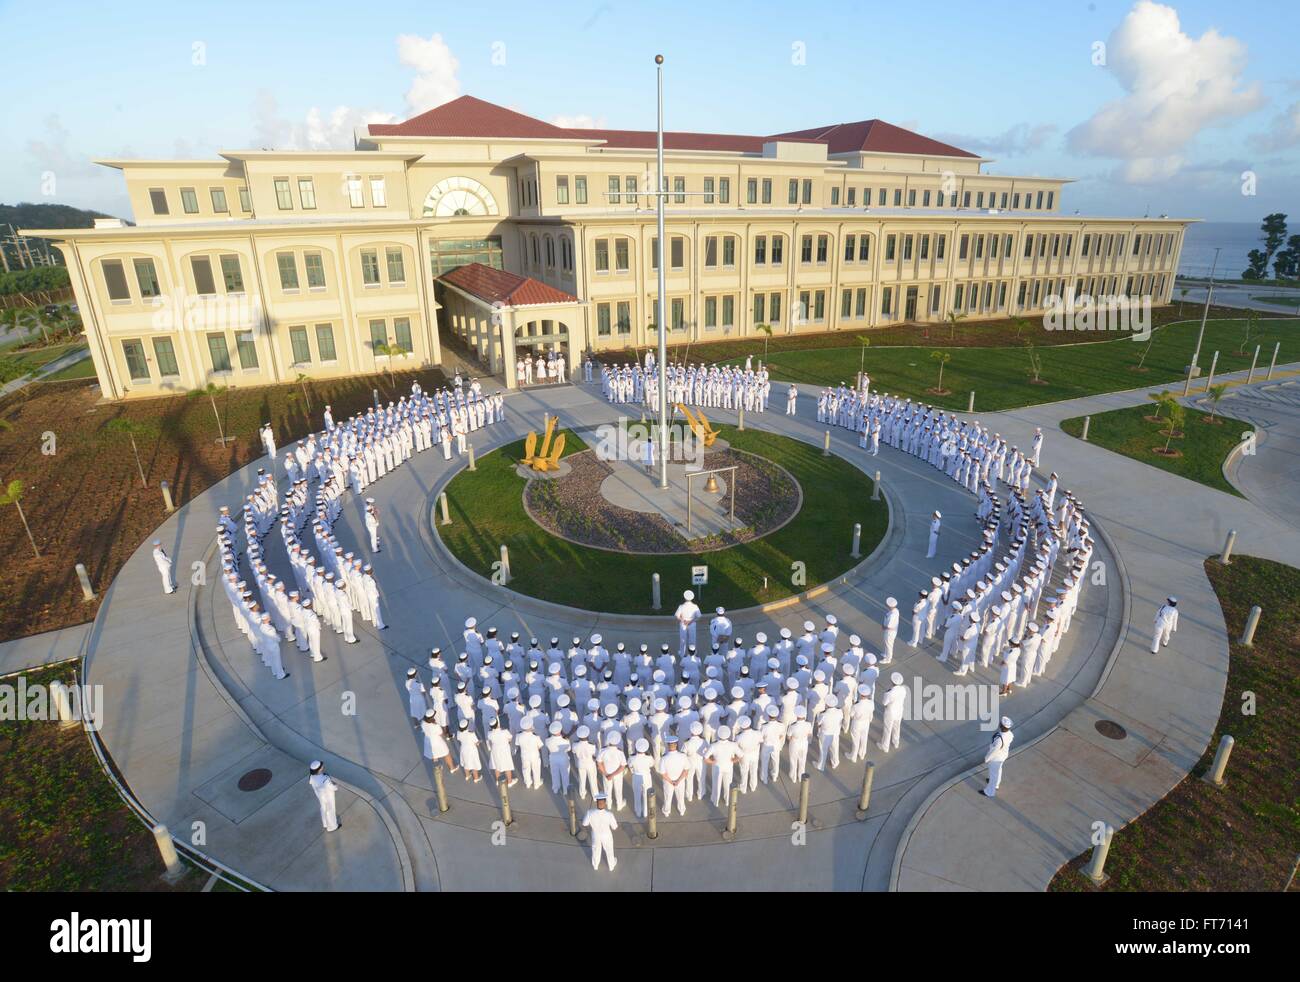 U.S. sailors from Naval Hospital Guam prepare for their annual dress whites inspection November 13, 2015 in Agana Heights, Guam. Due to the tropical climate the sailors based in Guam wear the dress white uniform all year instead of switching to the winter blue uniform. Stock Photo